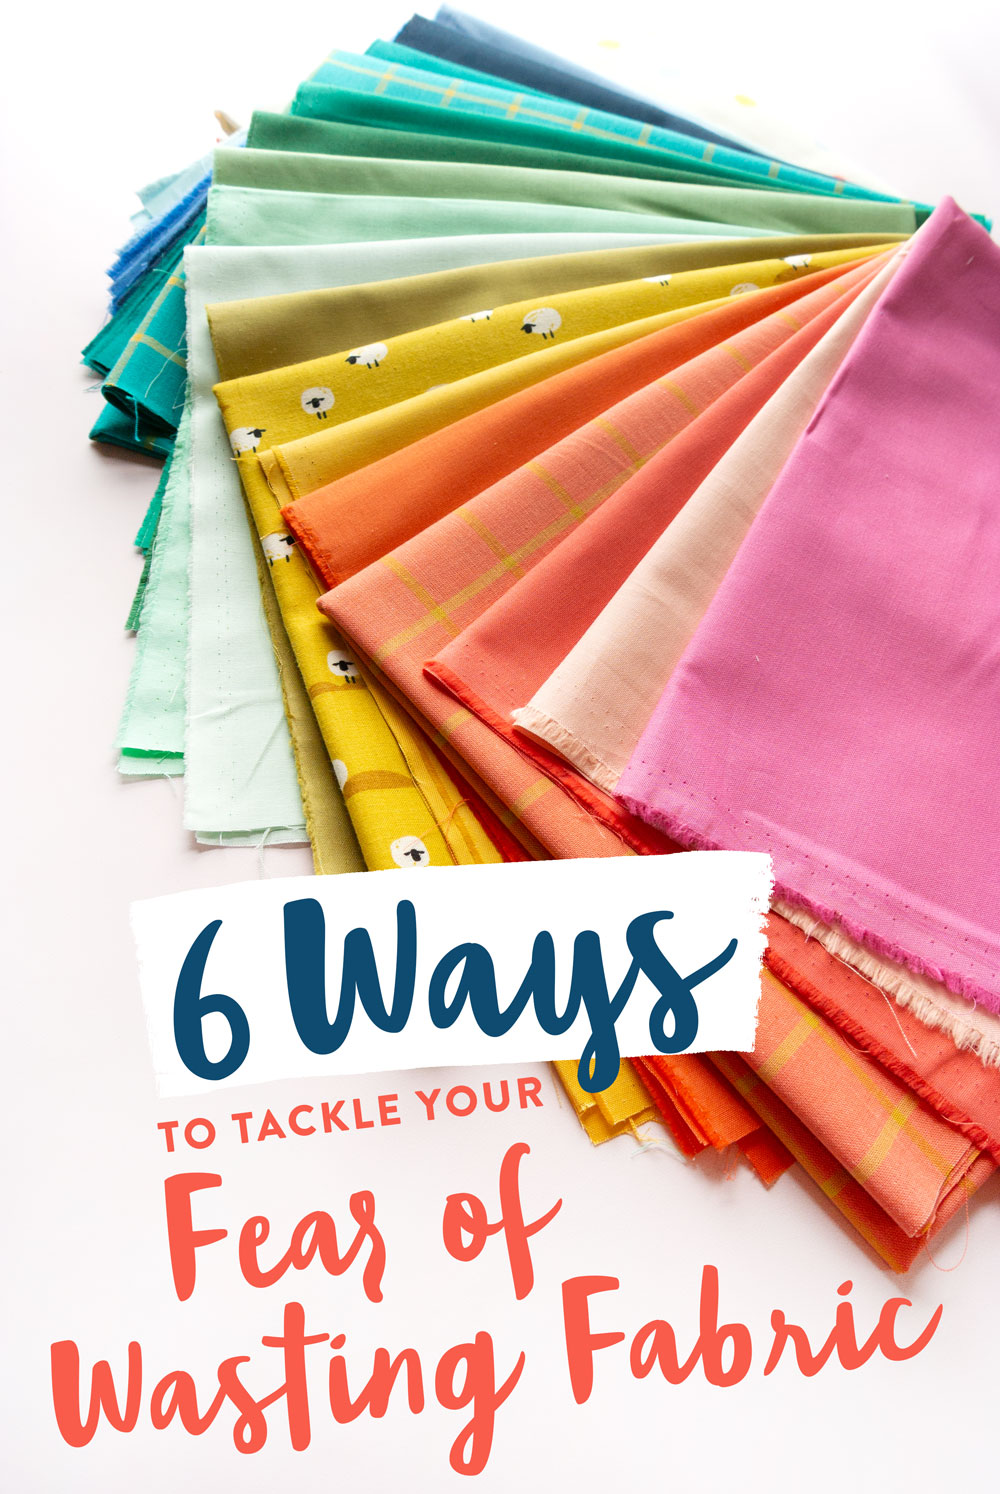 6 Ways to tackle your fear of wasting fabric. Have you ever been crippled by indecision because you're afraid to mess things up and waste fabric? These techniques will help.